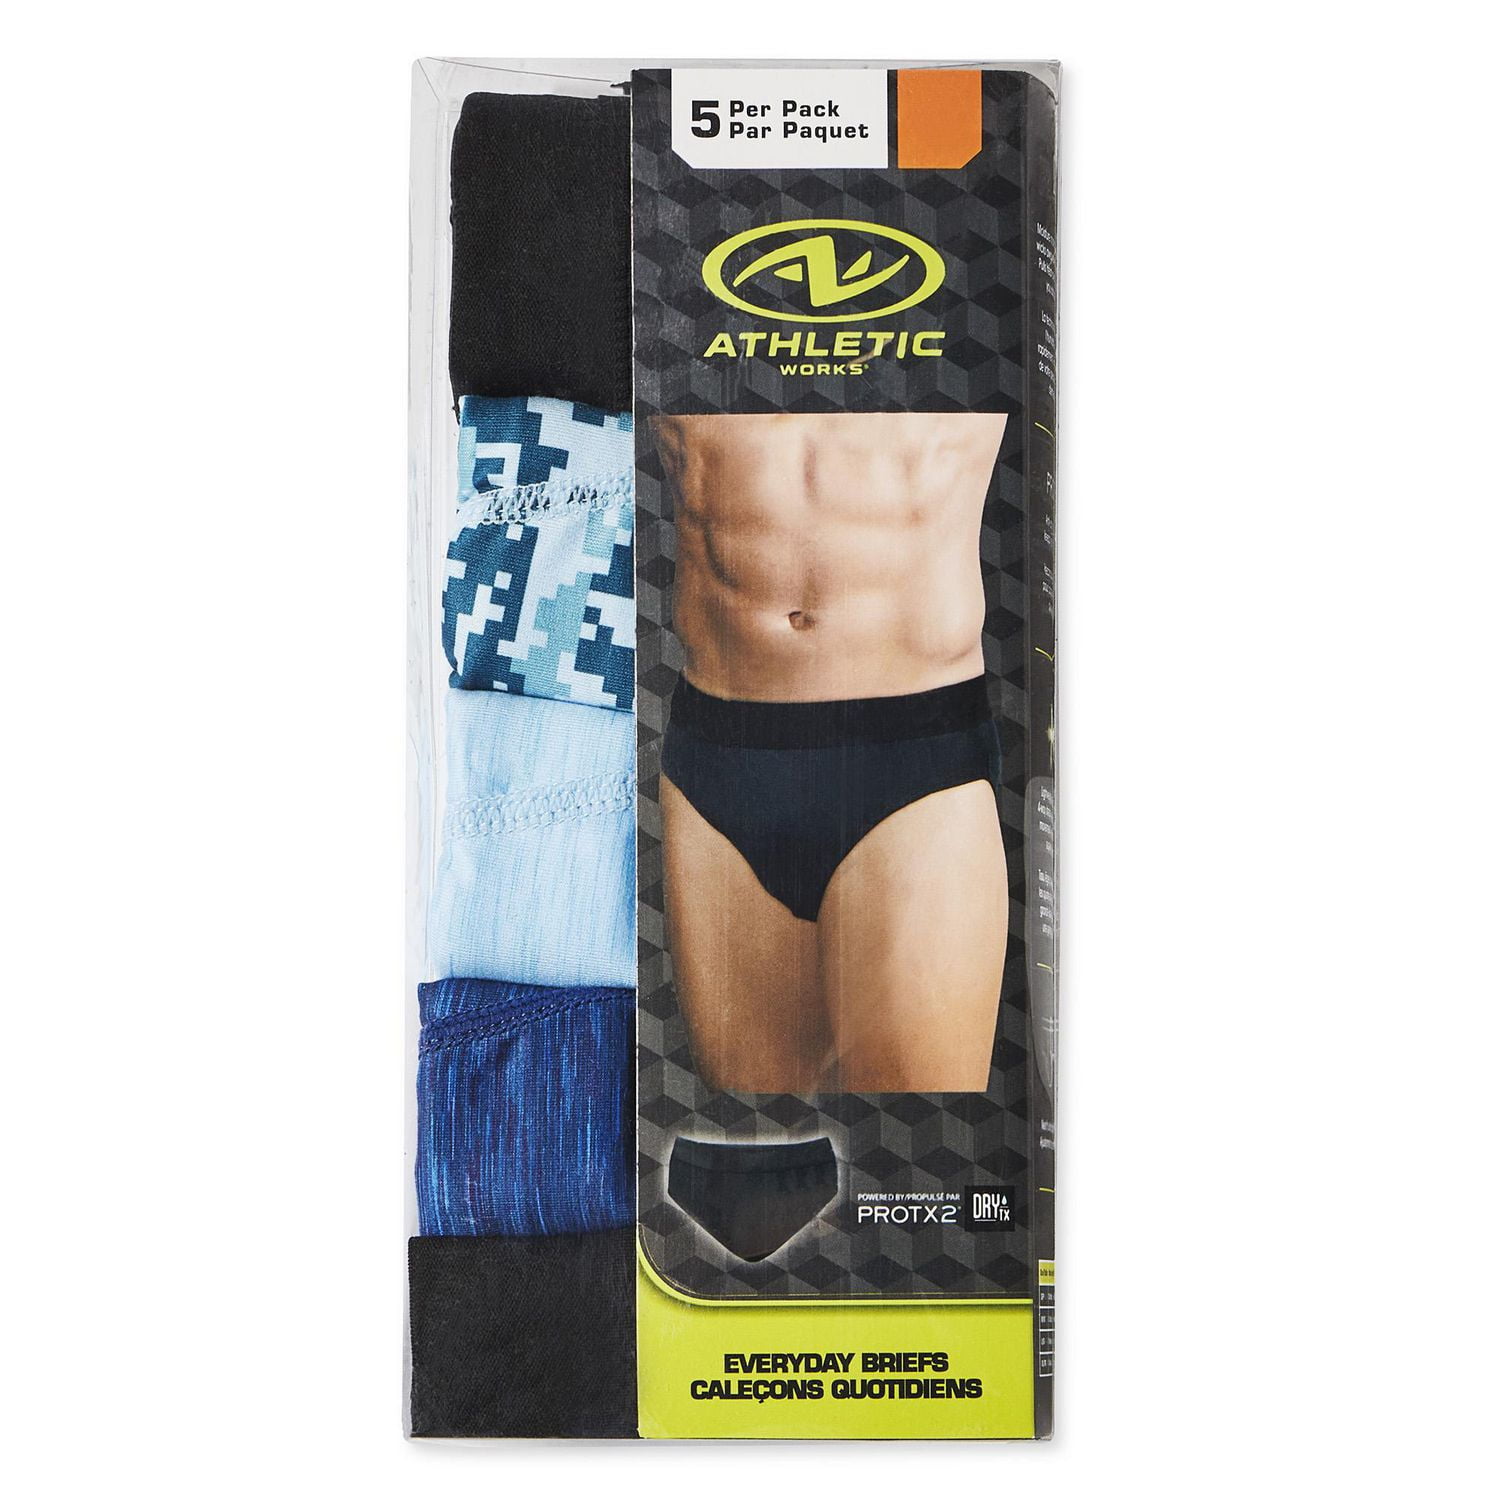 Match your gear to your ambition with Hustle Underwear and Socks. Available  at @walmart . They're outrageously comfortable and relentle